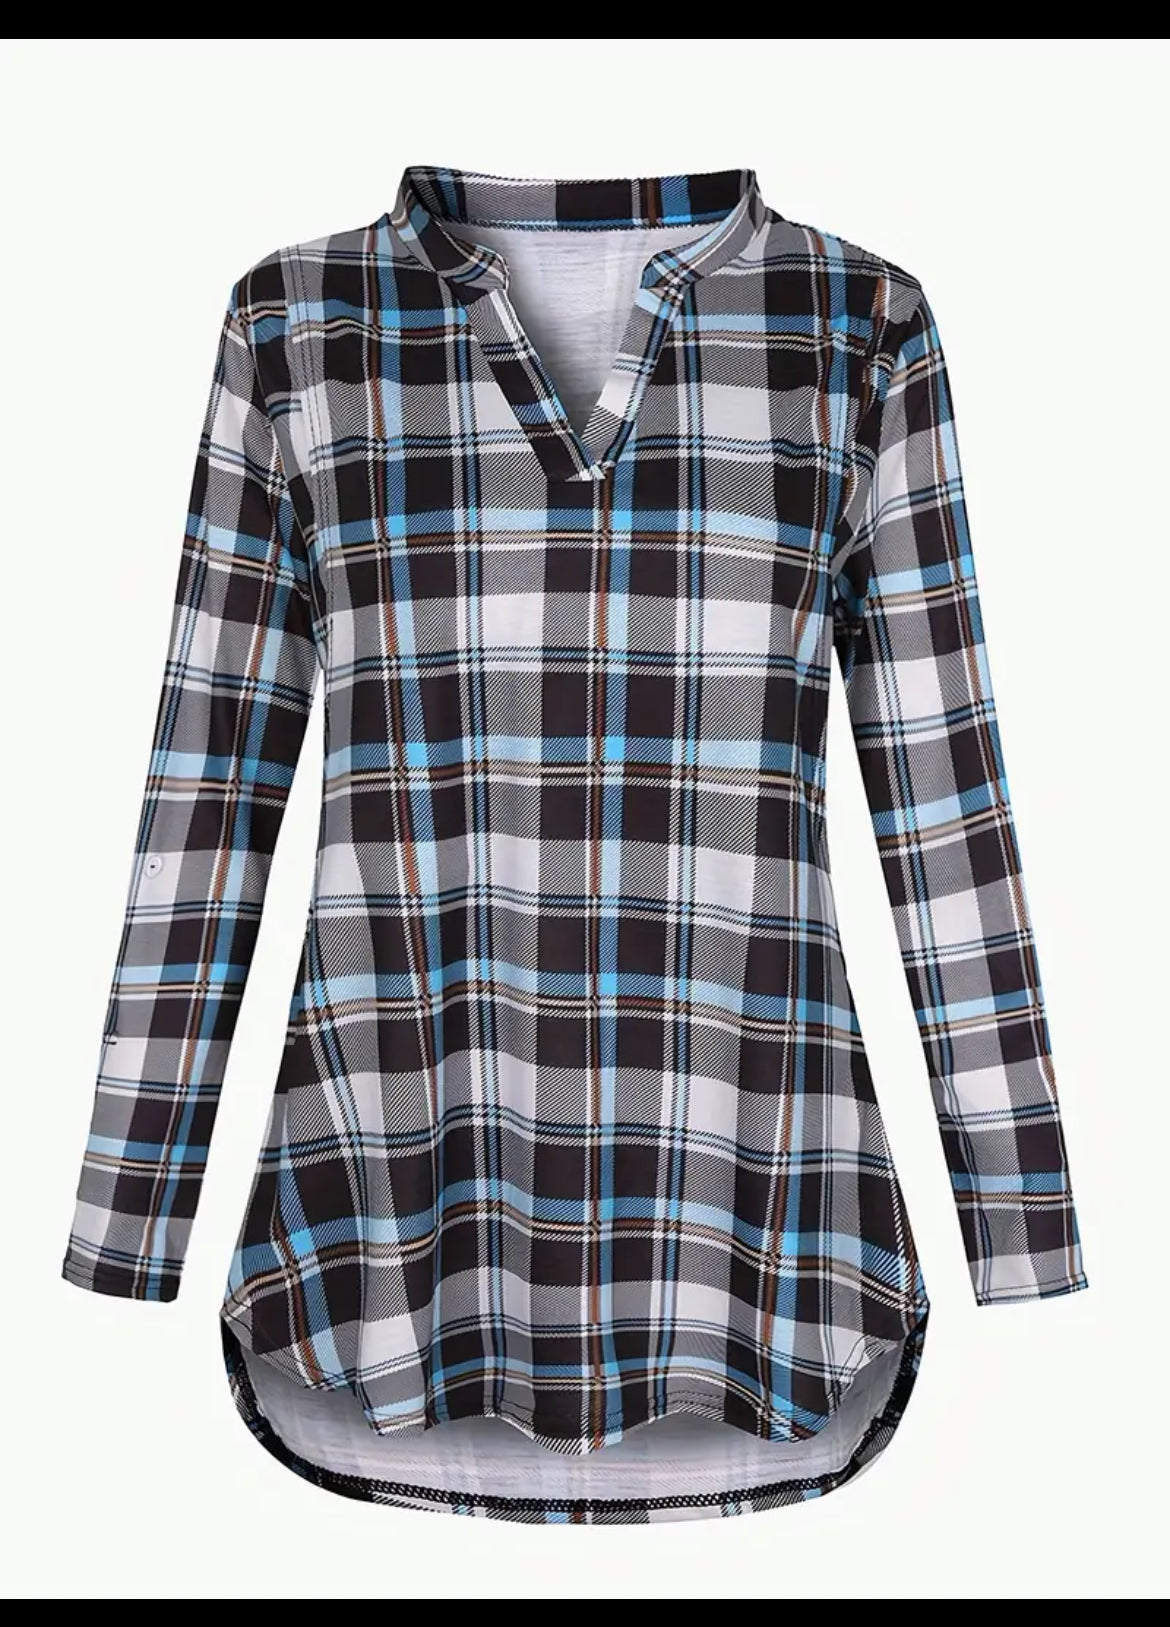 Stylish Plaid Maternity Nursing Shirt With Side Split For Breastfeeding, Baby 🌟🌙 Bumps Maternity Collection